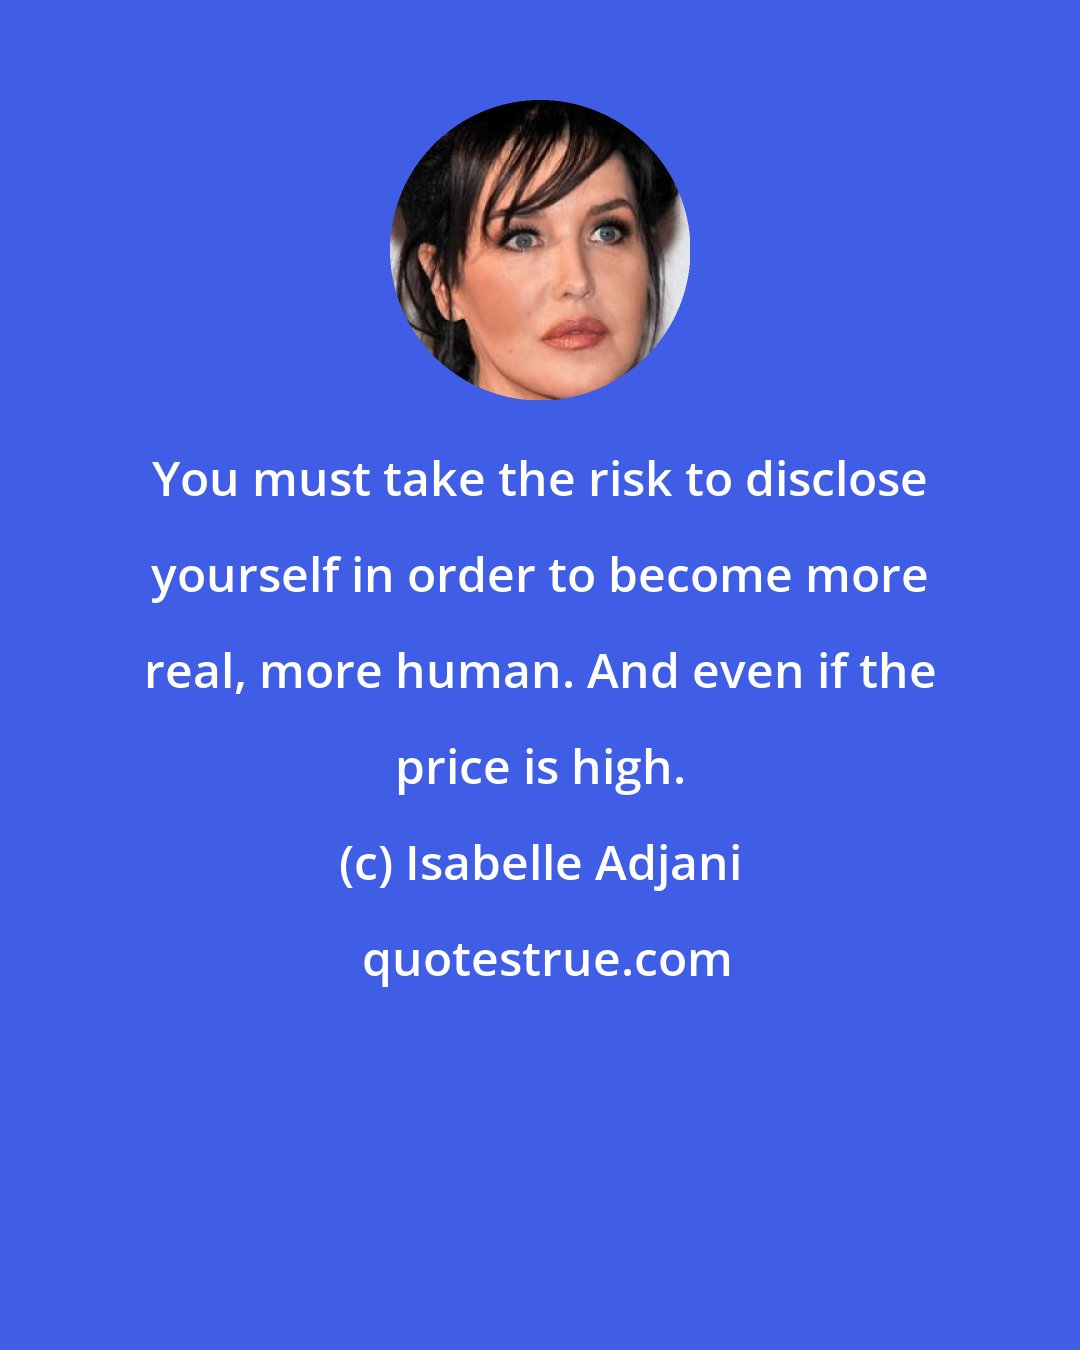 Isabelle Adjani: You must take the risk to disclose yourself in order to become more real, more human. And even if the price is high.